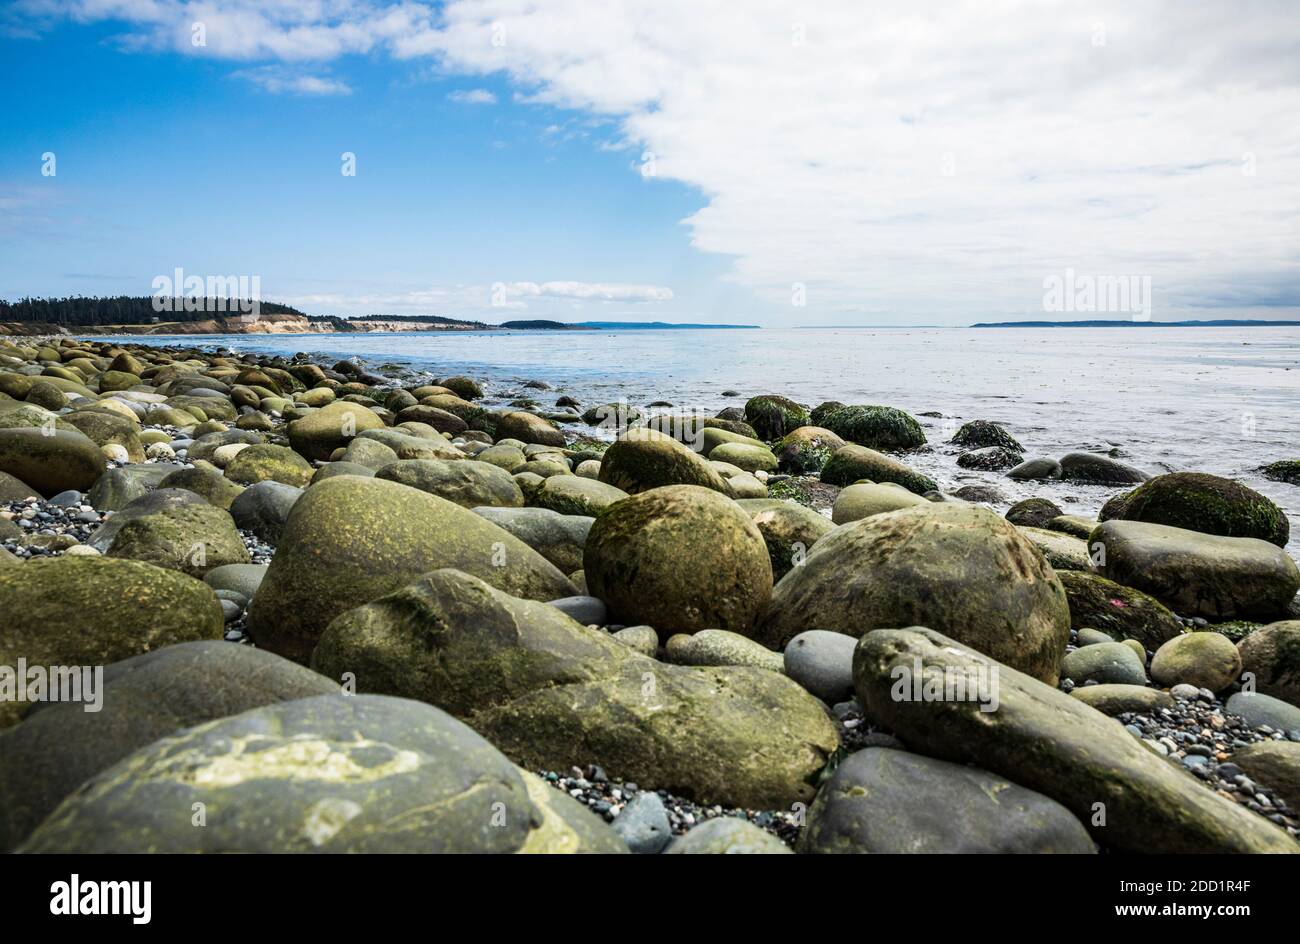 A low angle view from down on the rocks at low tide on Ebeys Landing beach on the shores of the Salish sea, Puget Sound, Washington, USA. Stock Photo